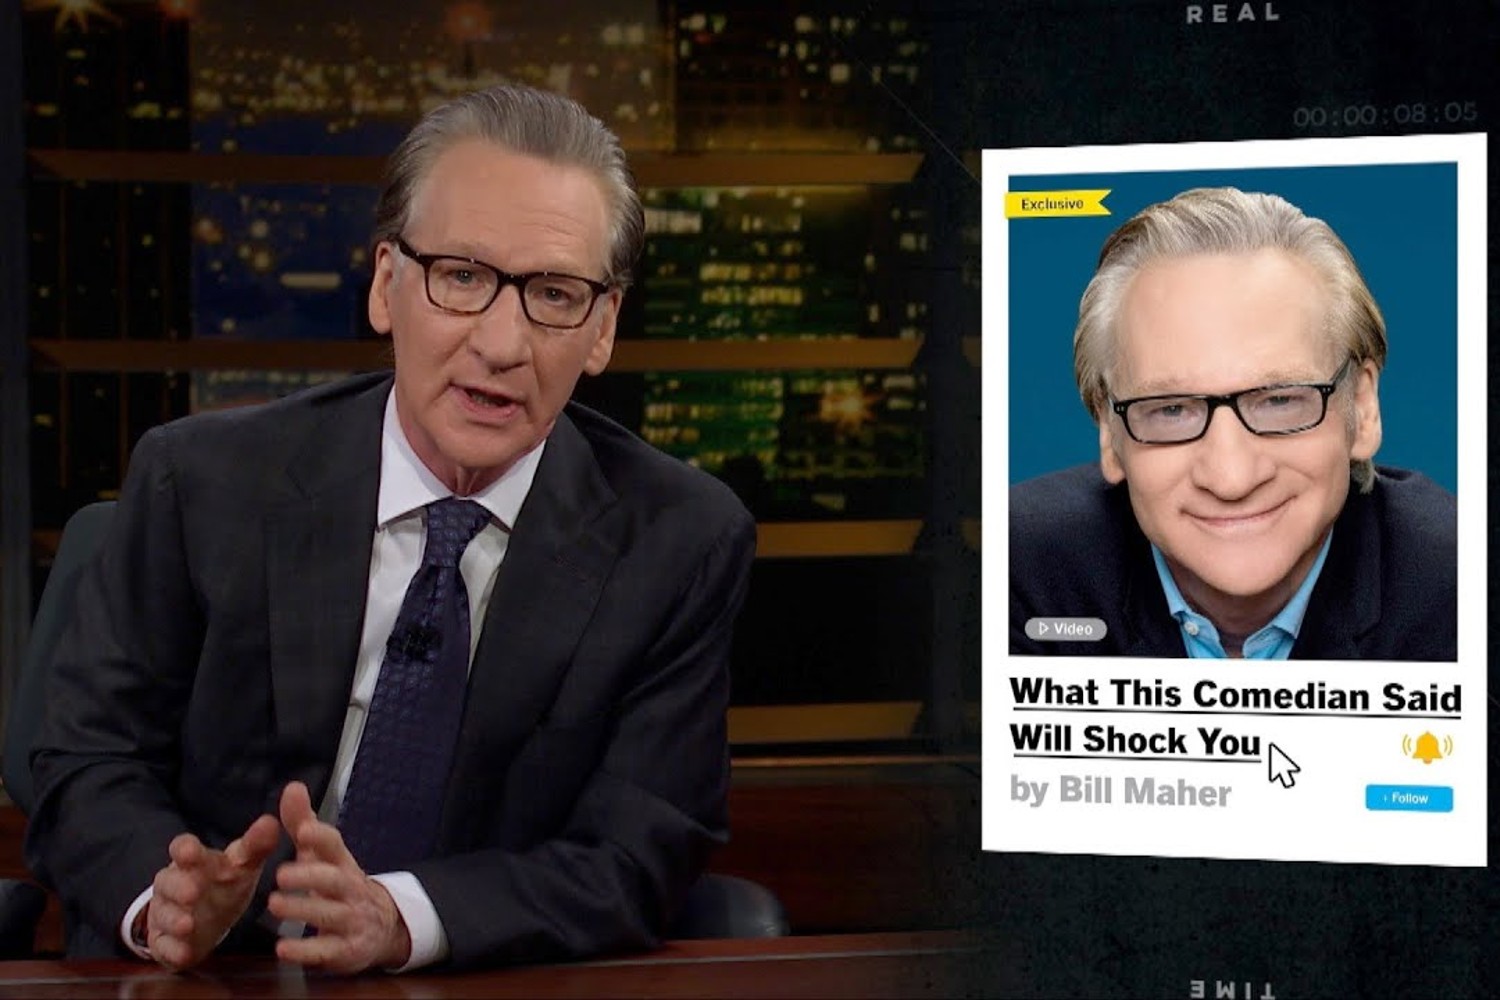 Bill Maher’s Latest “Real Time” Episode Was a Study in Contradictions